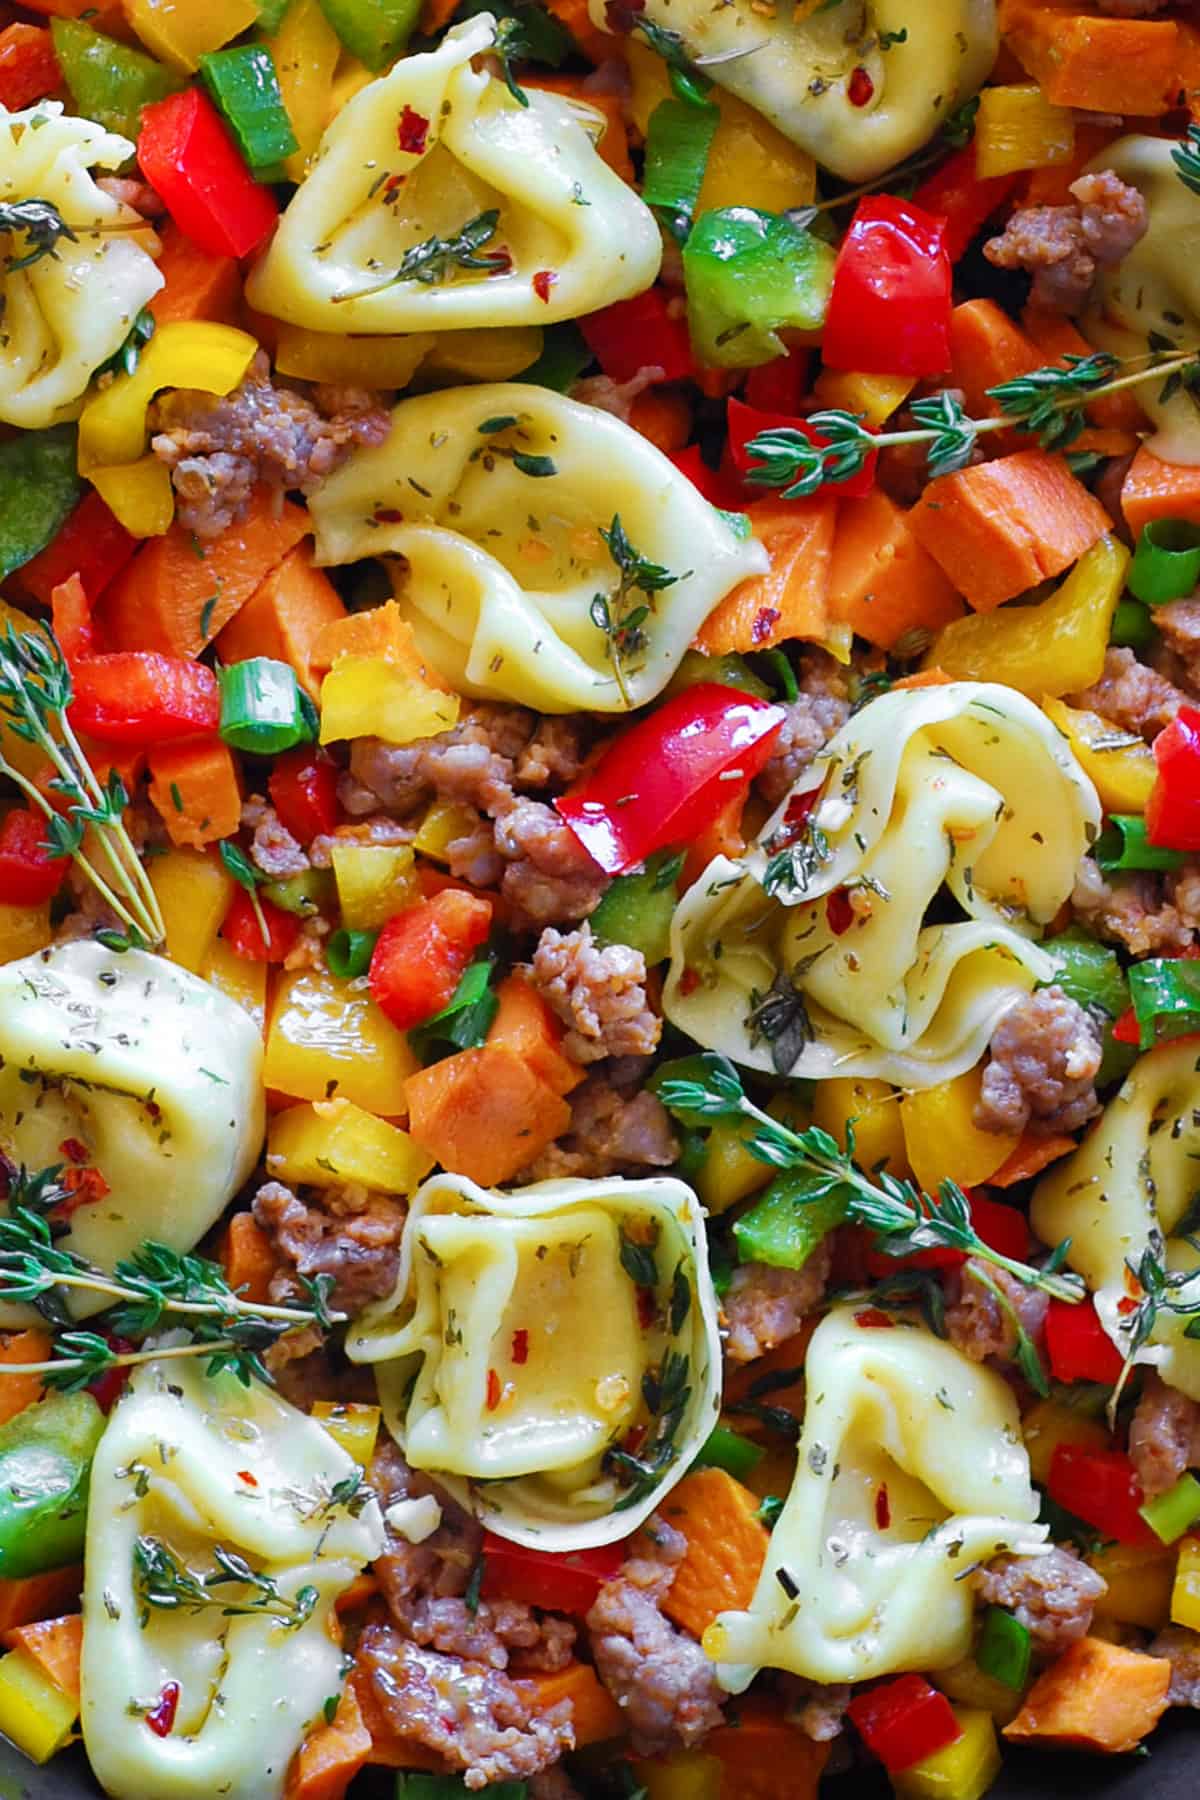 Sweet Potato Skillet with Tortellini, Sausage, and Bell Peppers - close-up photo.